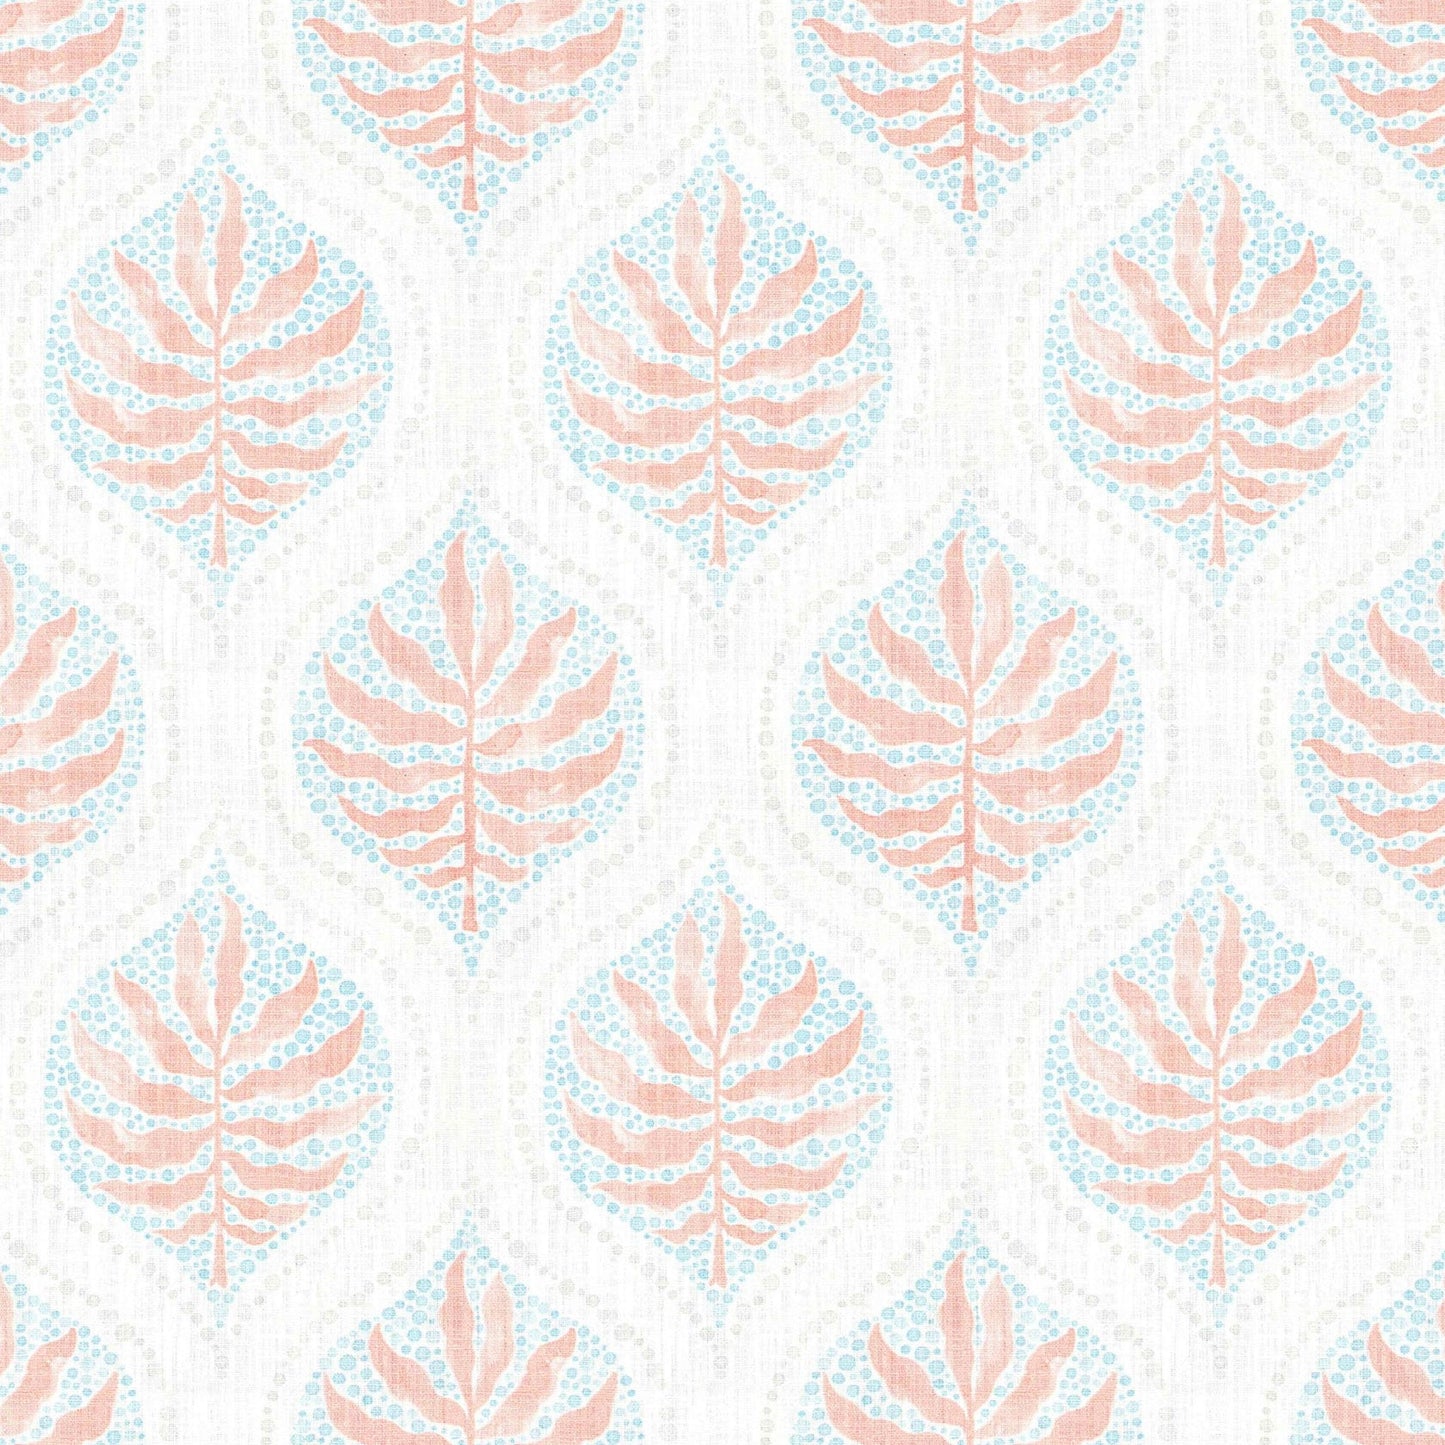 Tailored Crib Skirt in Airlie Coral Ogee Floral Watercolor - with Blue, Gray